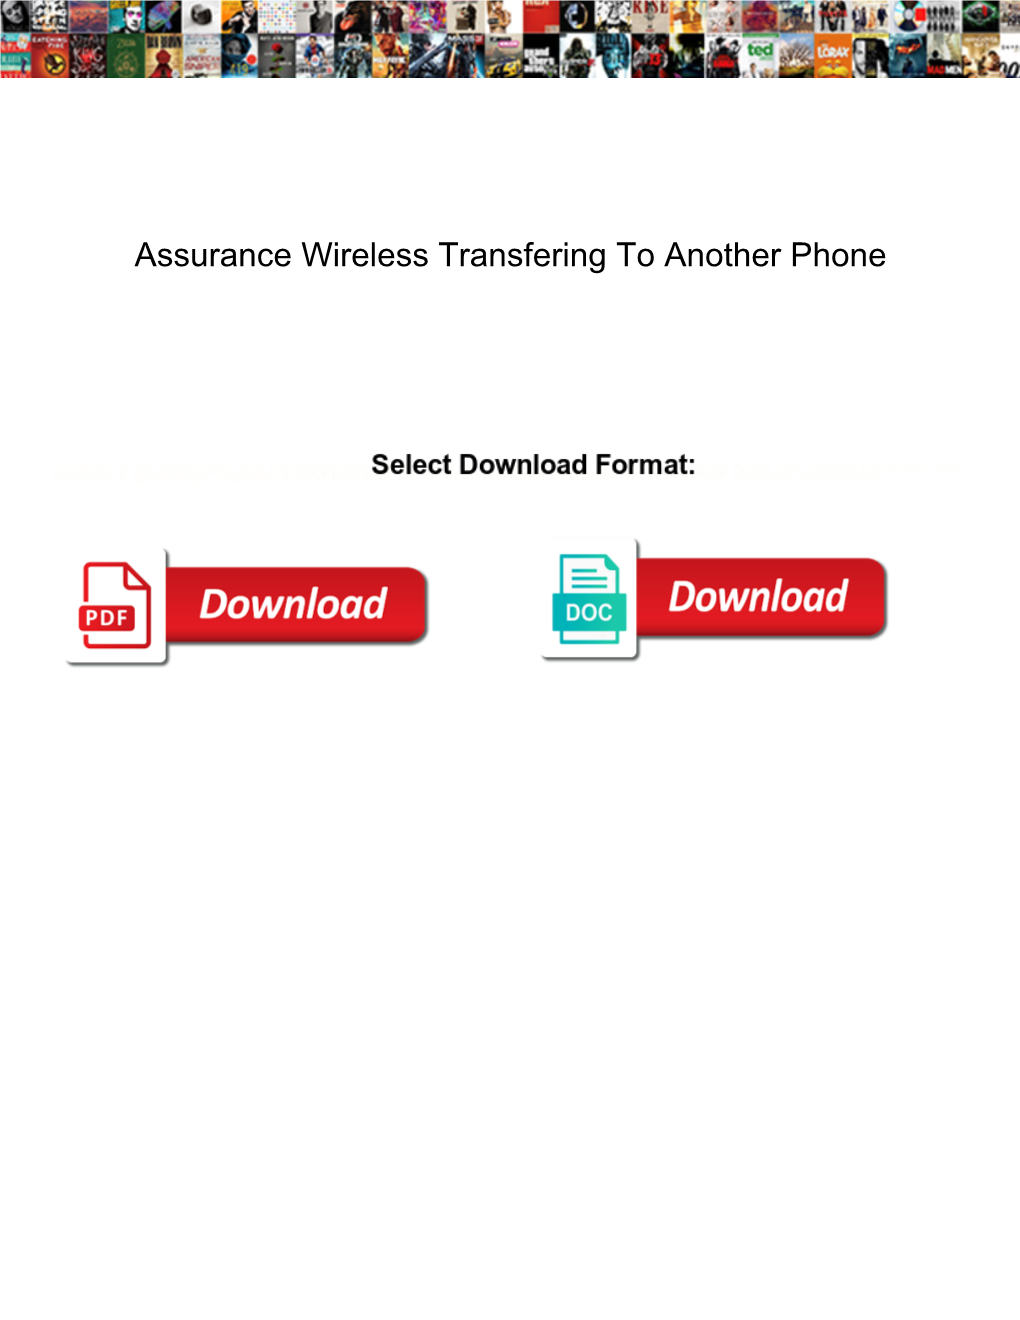 Assurance Wireless Transfering to Another Phone